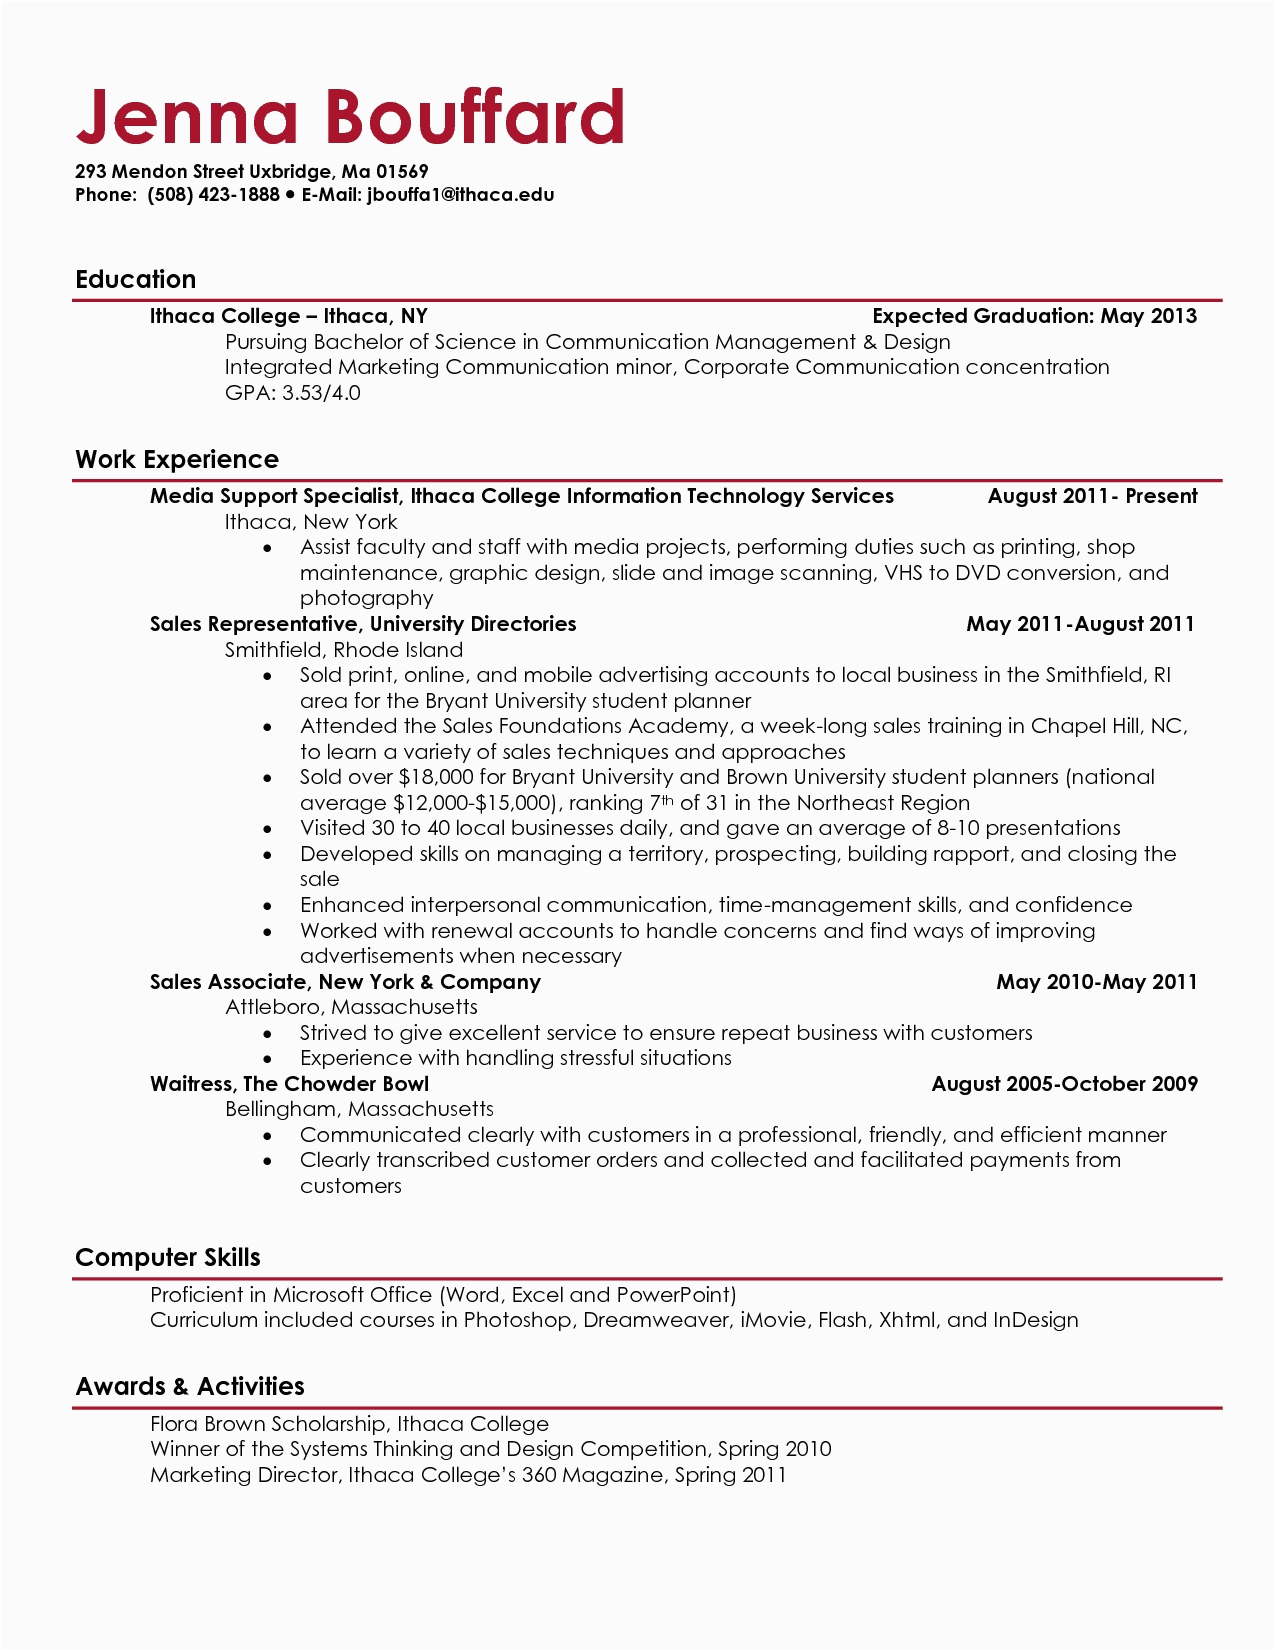 Basic Resume Template for College Students College Student Resume Examples